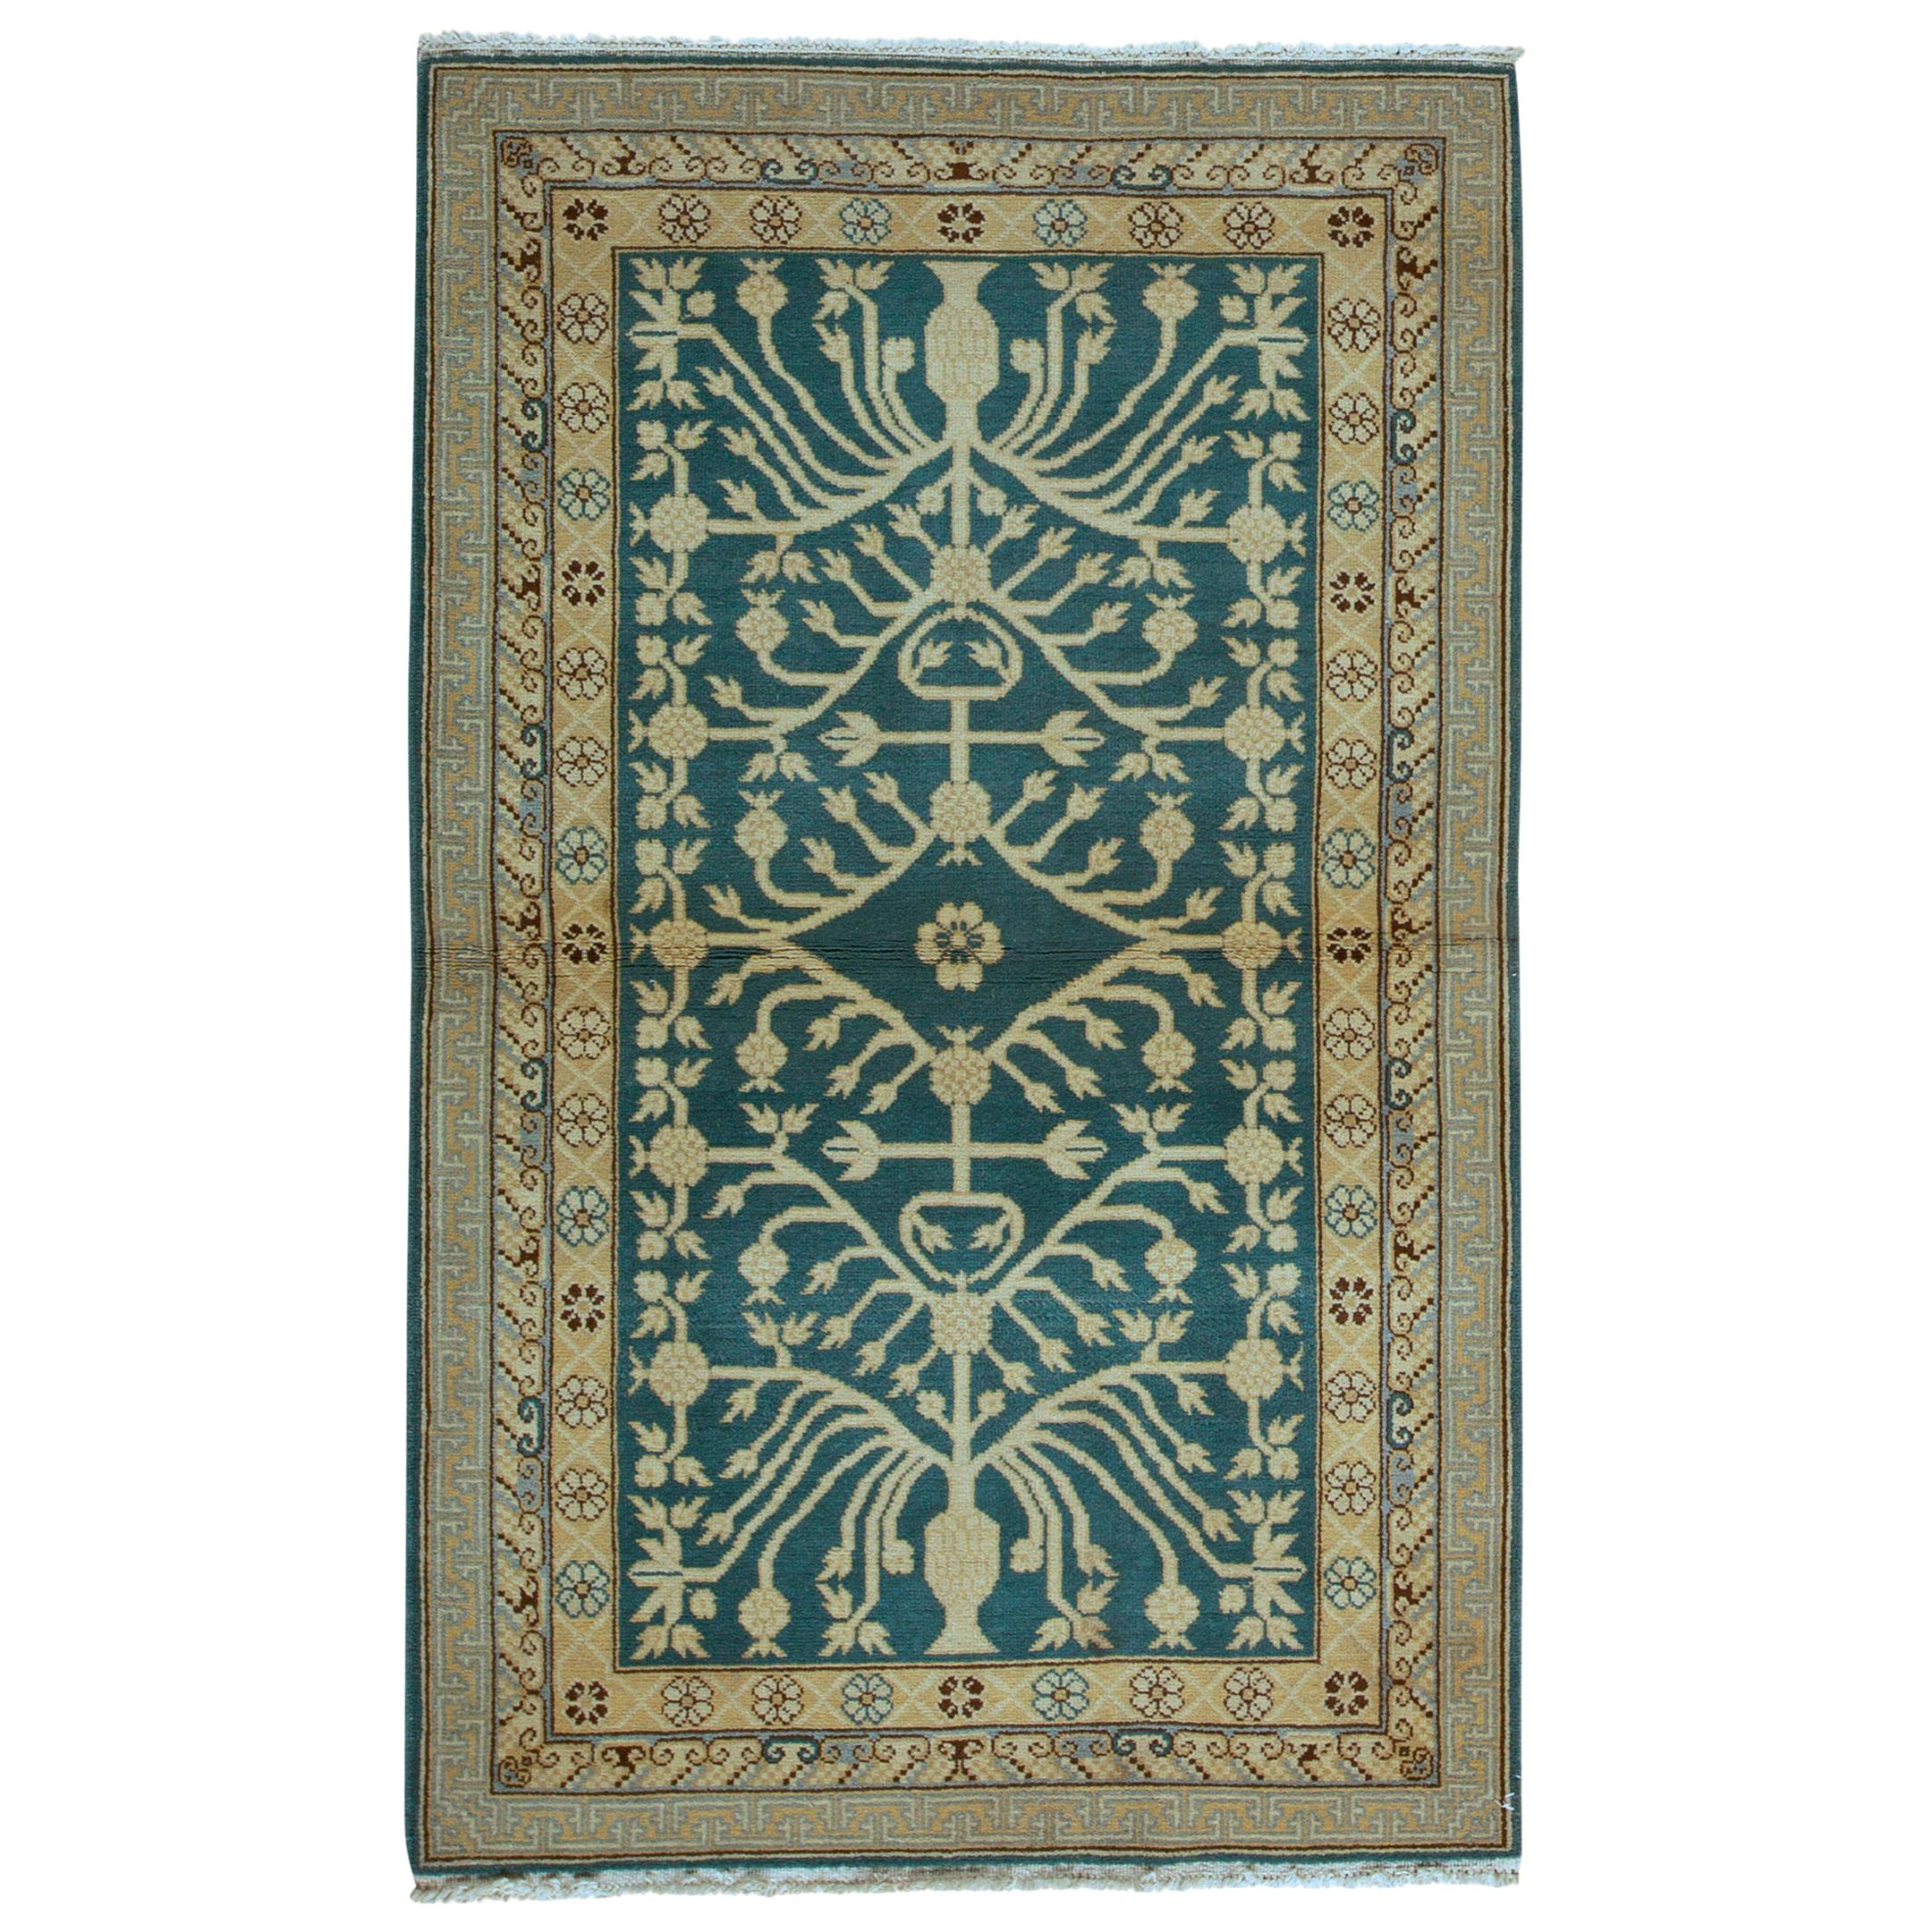  Traditional Handwoven Luxury Wool Semi Antique Blue Rug.